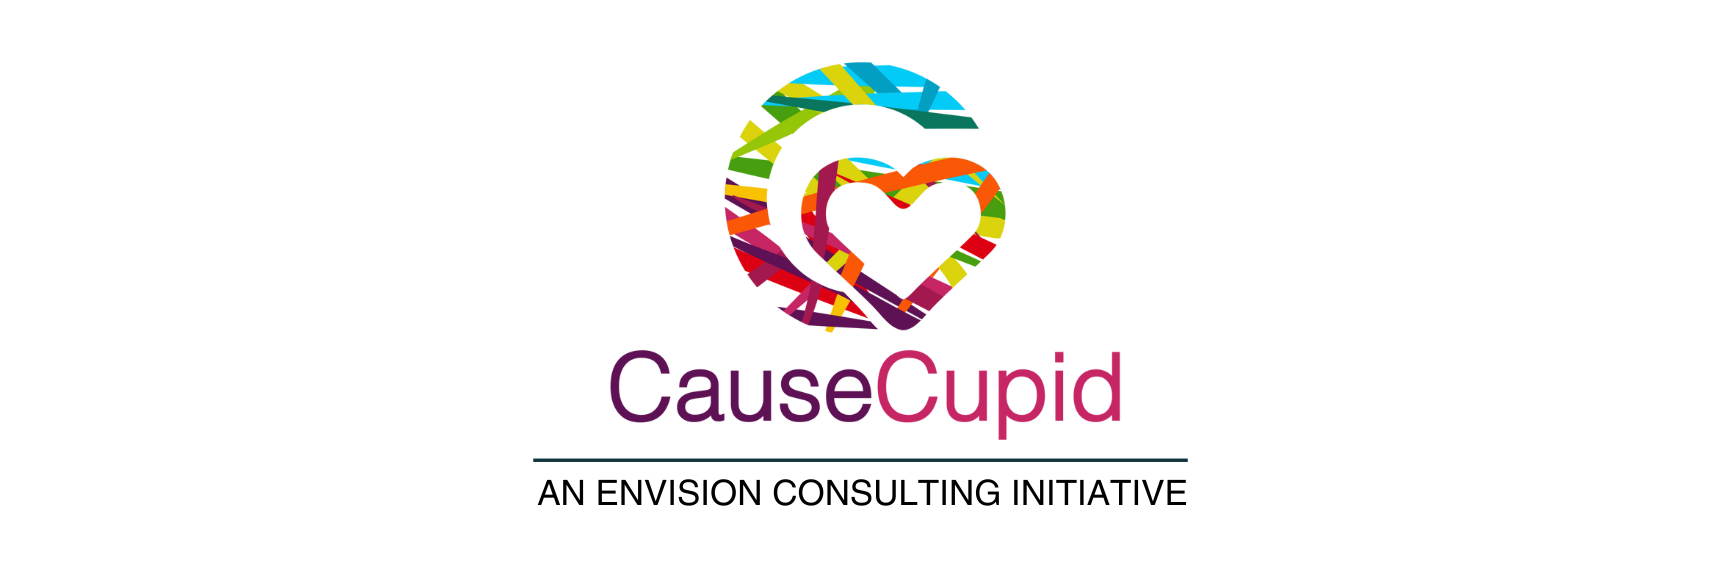 CauseCoaching & Cupid BANNER-2